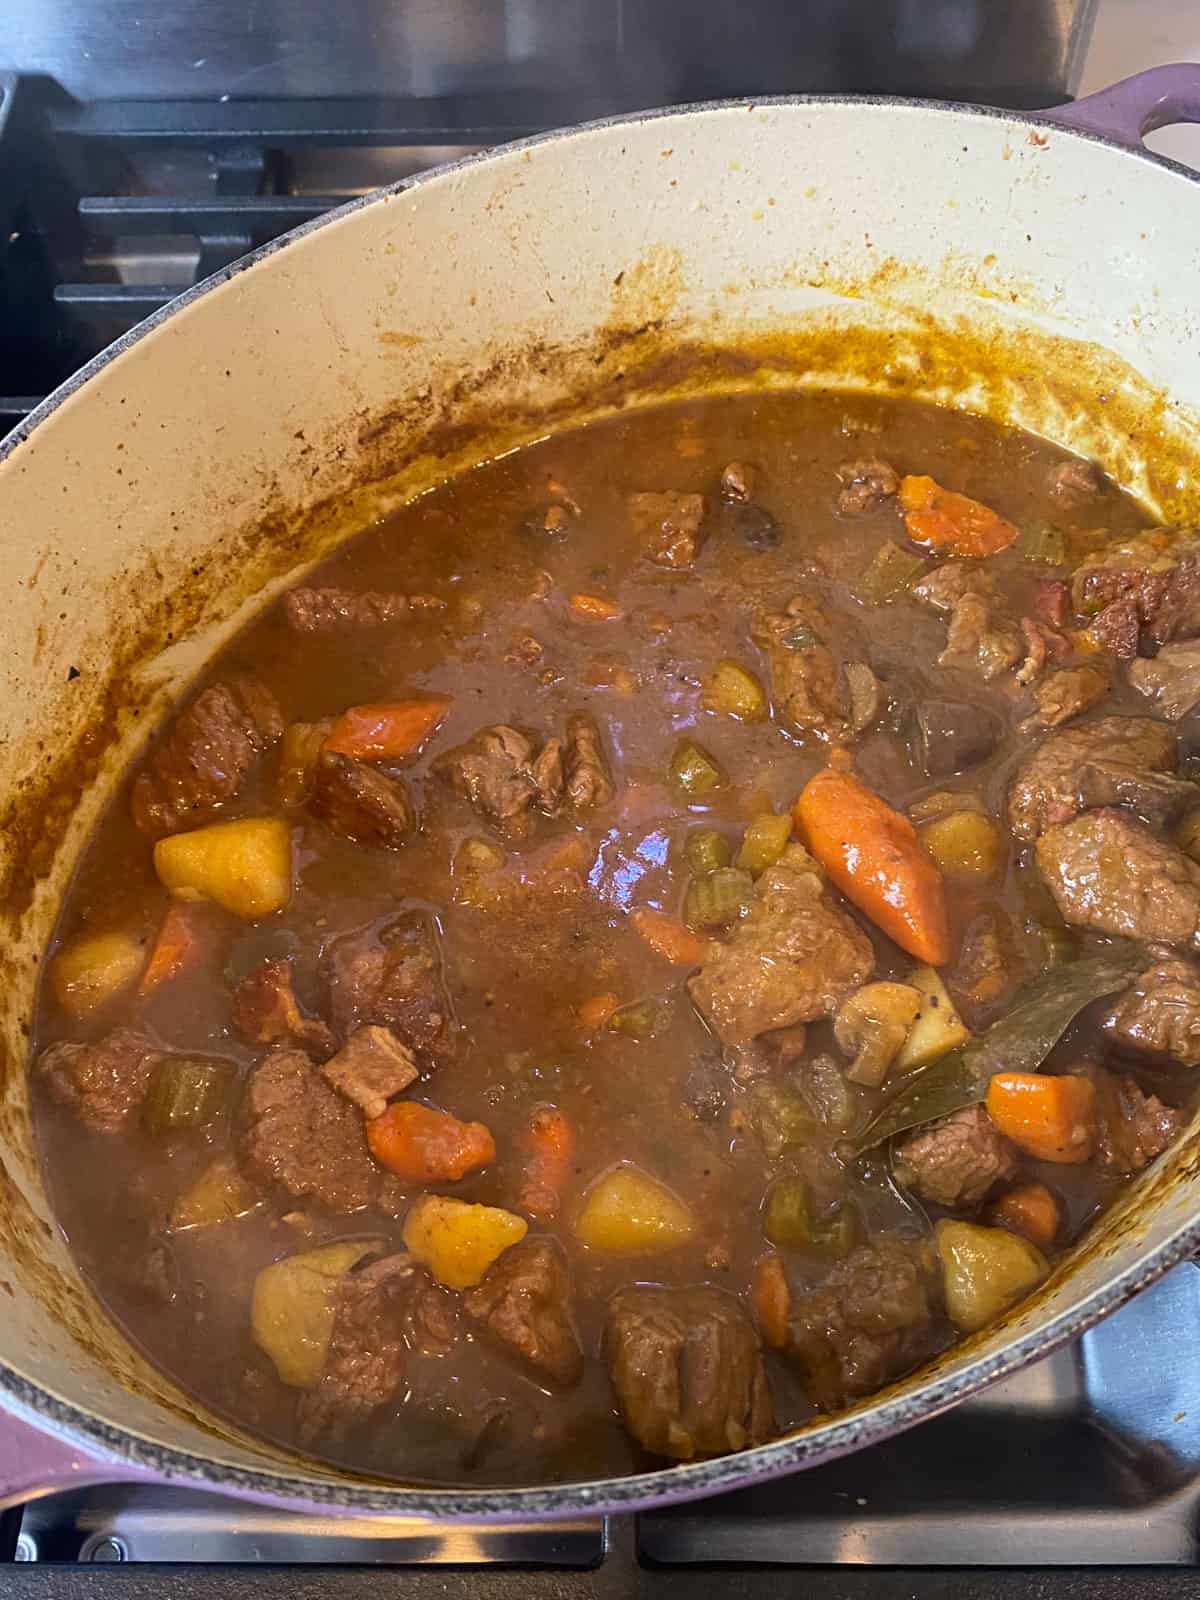 Cook the beef stew for several hours until the vegetables are tender and broth has thickened.